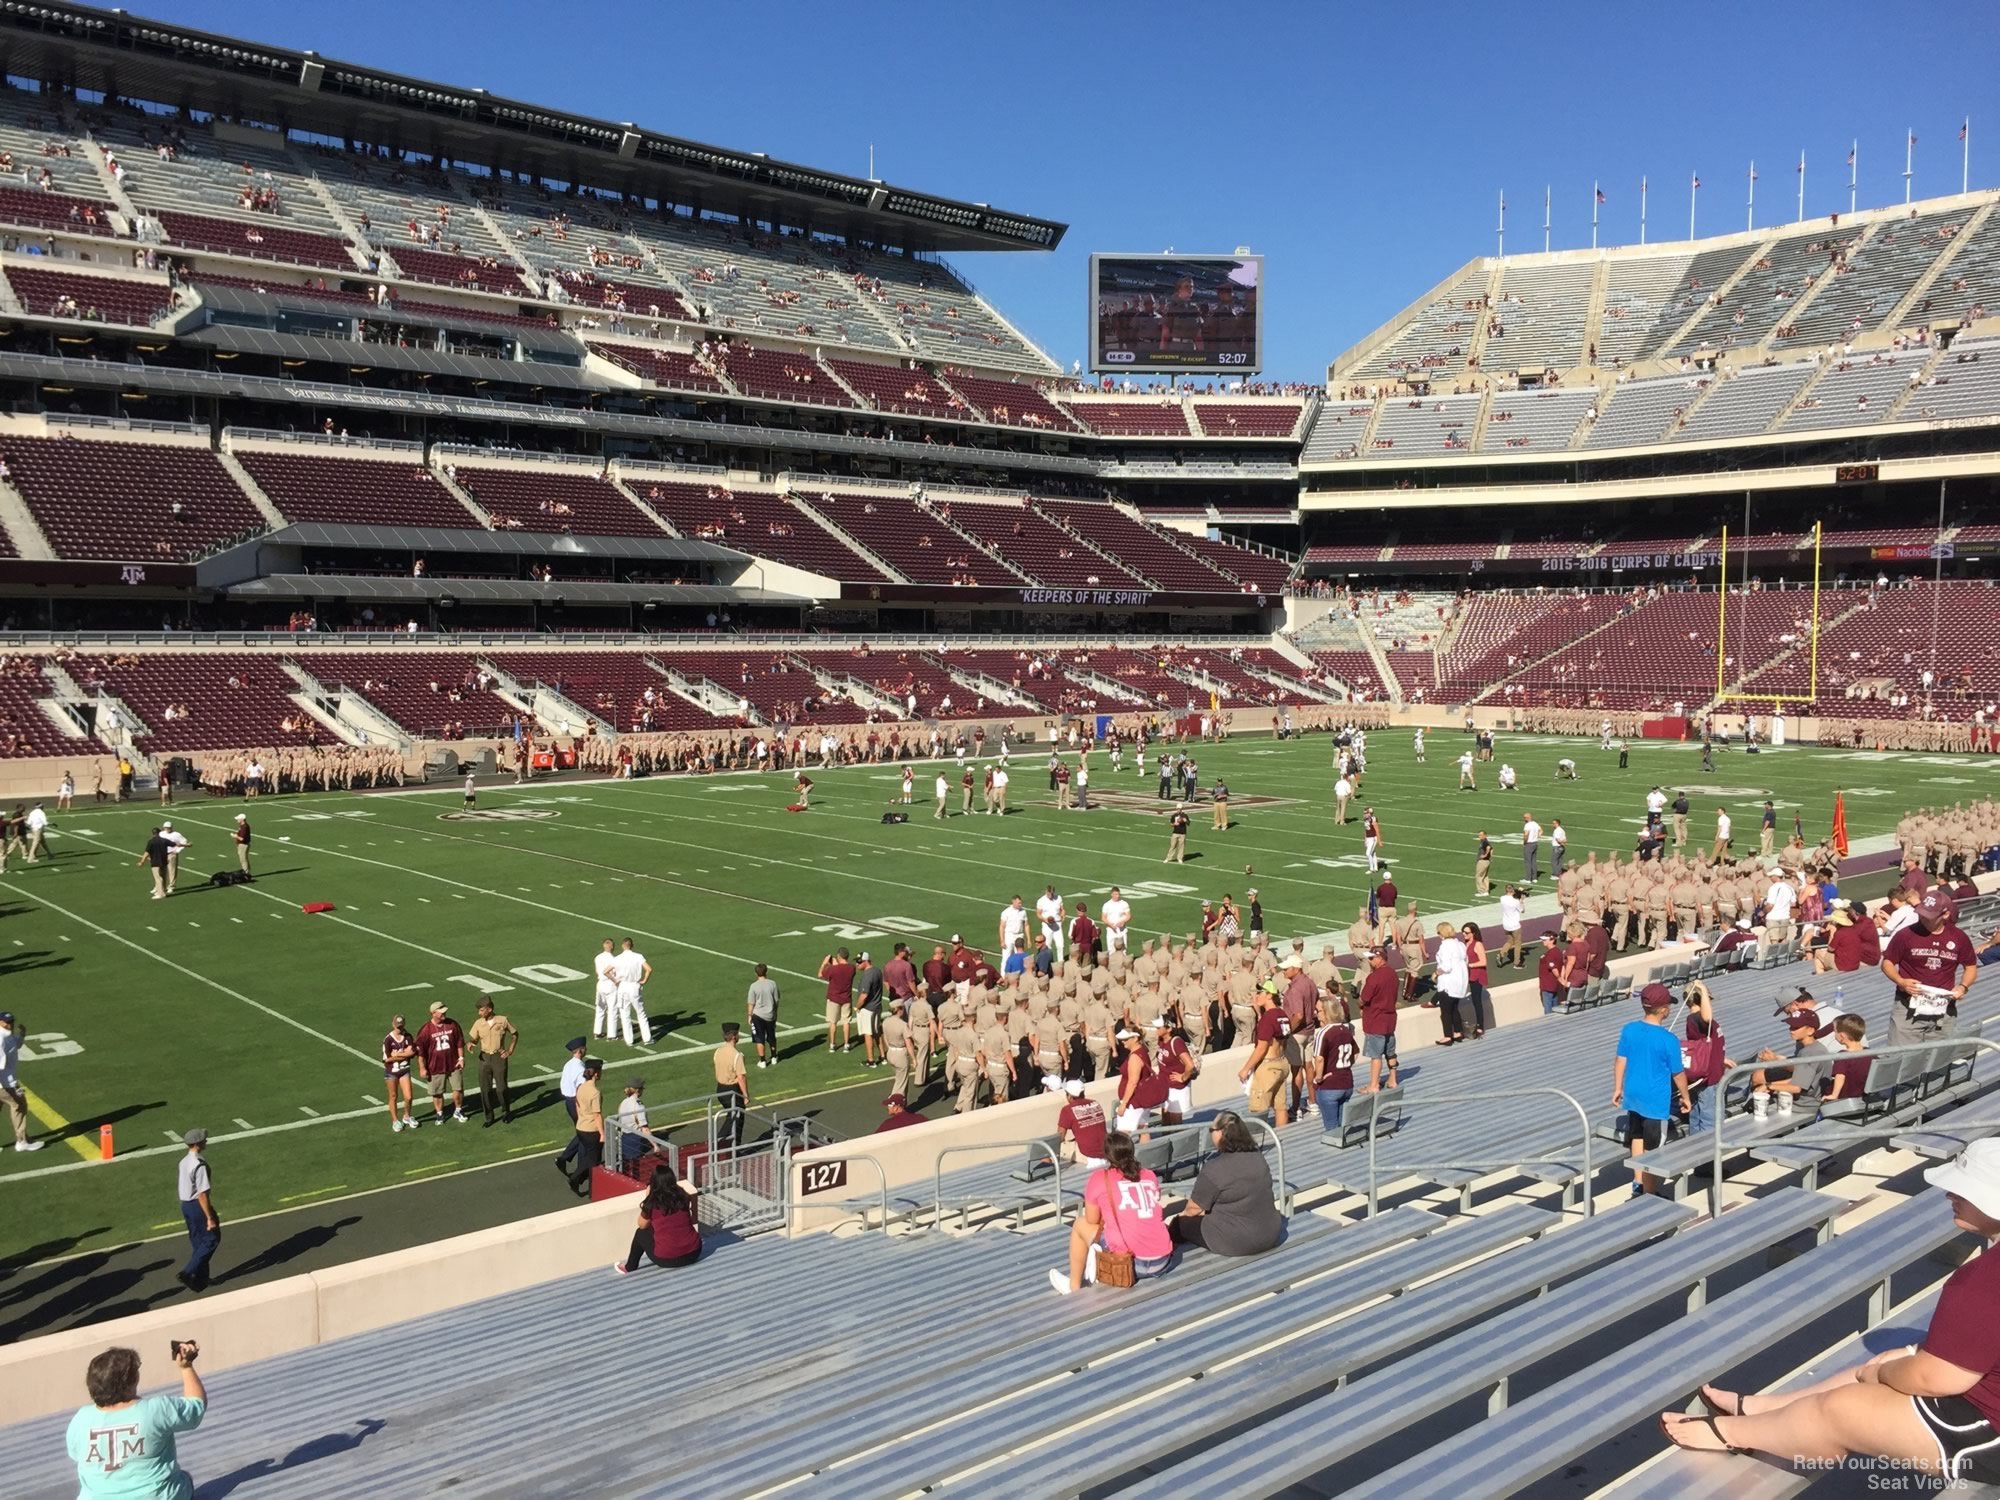 section 128, row 20 seat view  - kyle field